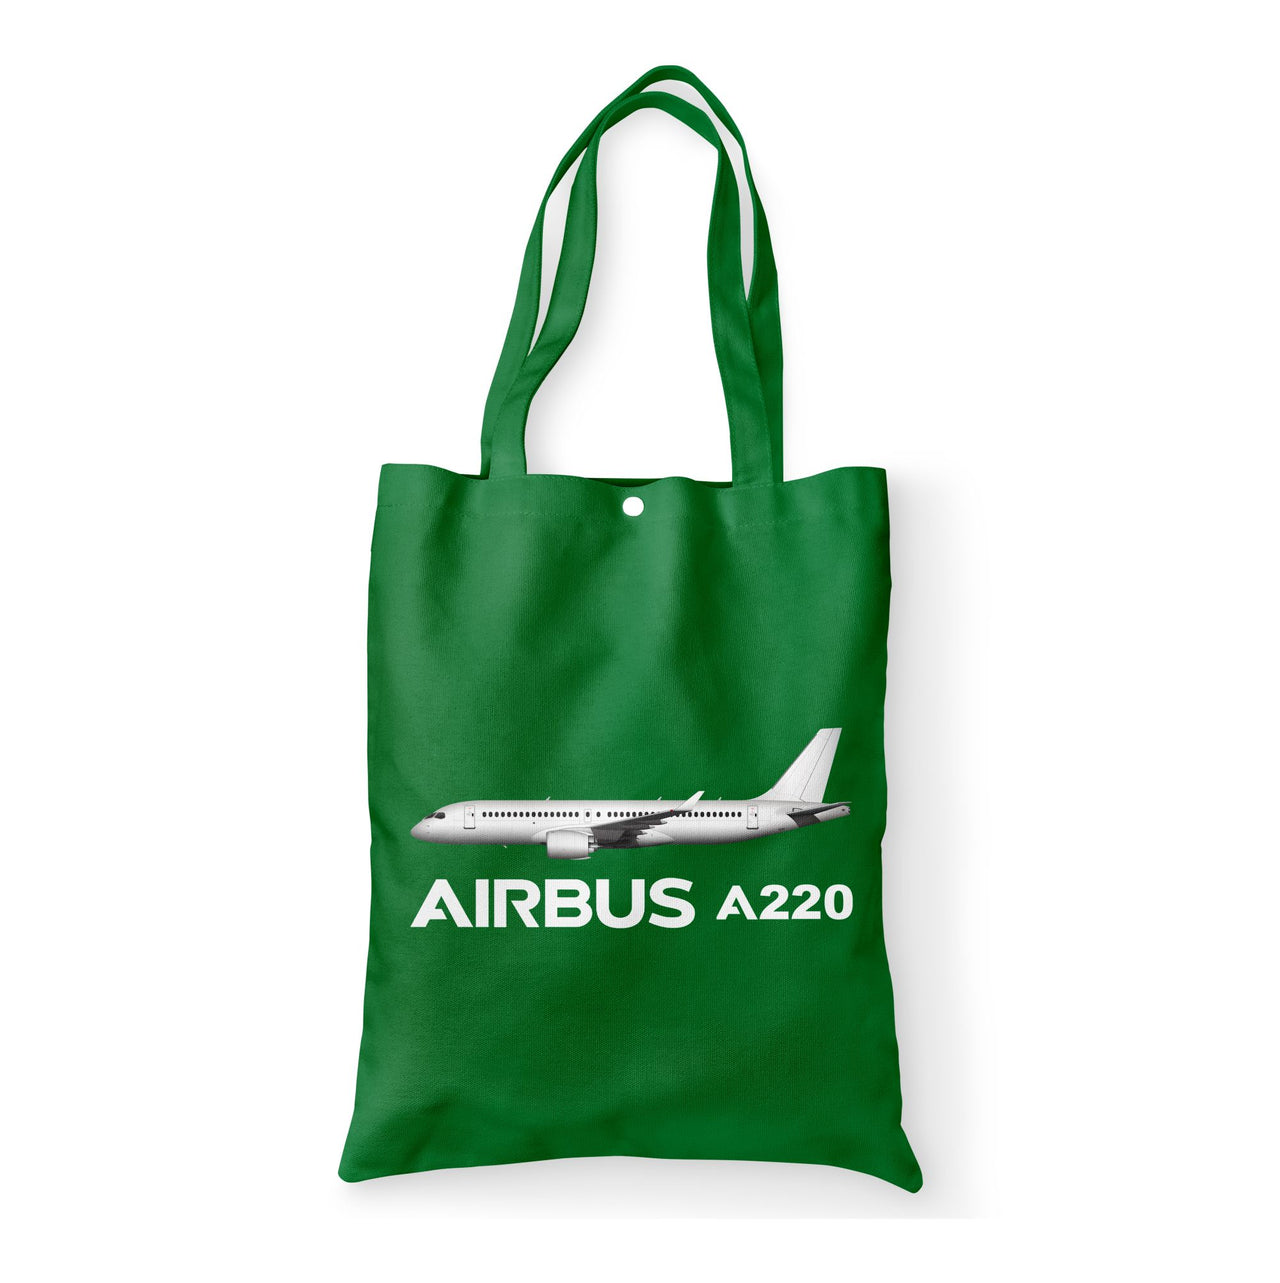 The Airbus A220 Designed Tote Bags